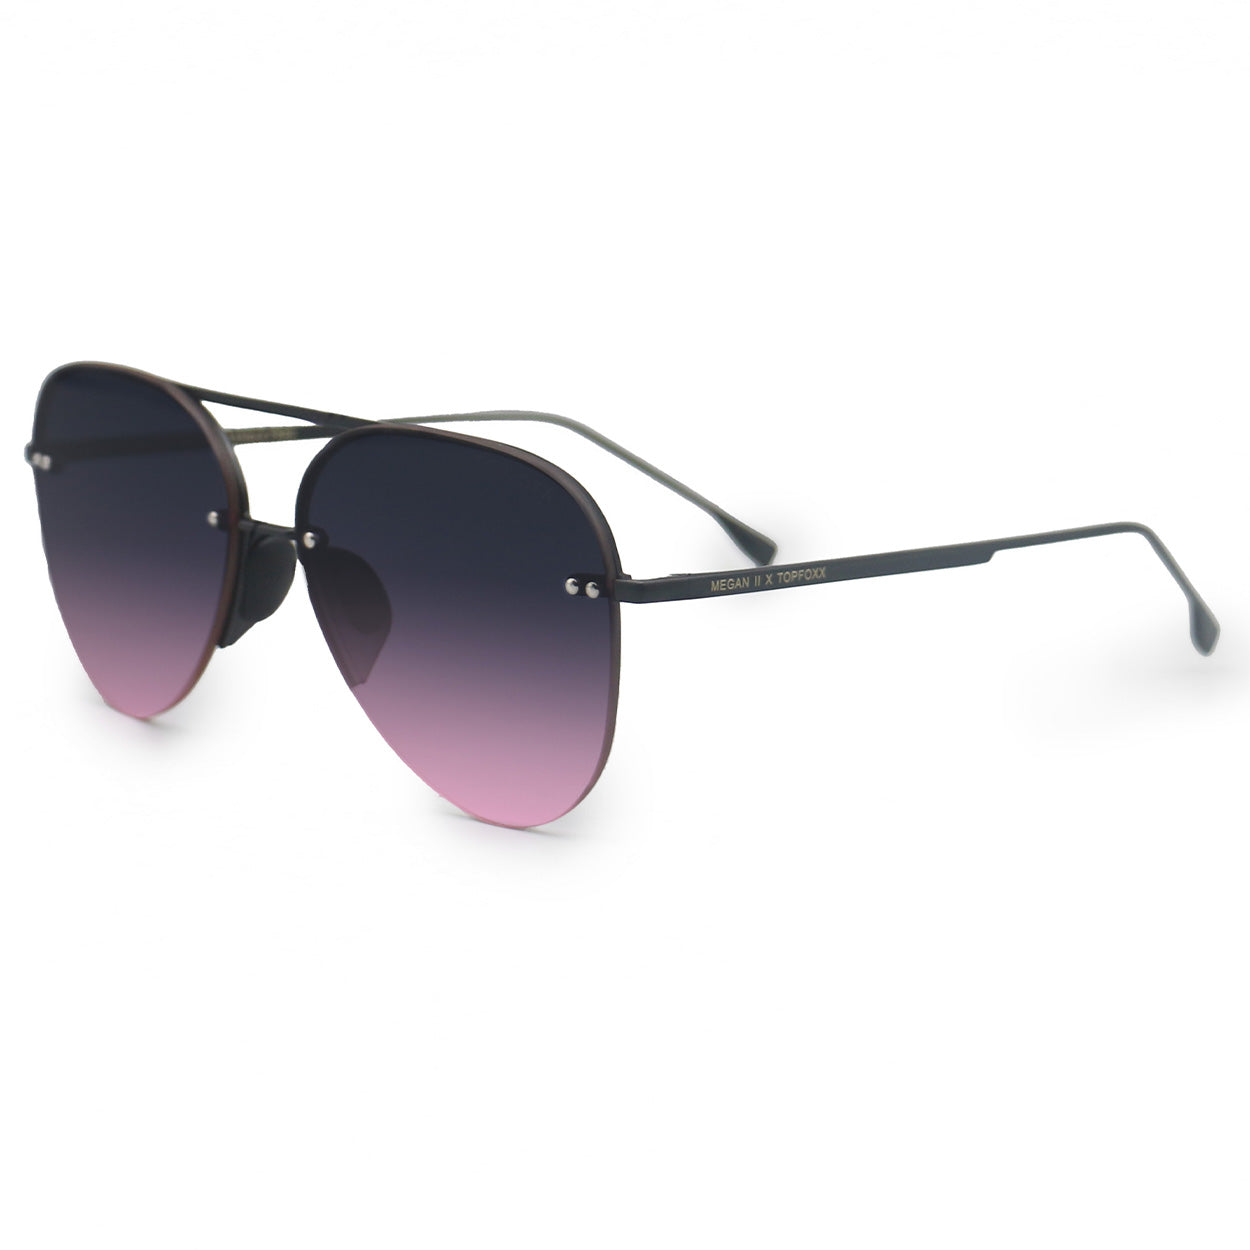 White background side image of classic aviators with no nosepad and faded purple pink lenses with metal detailing